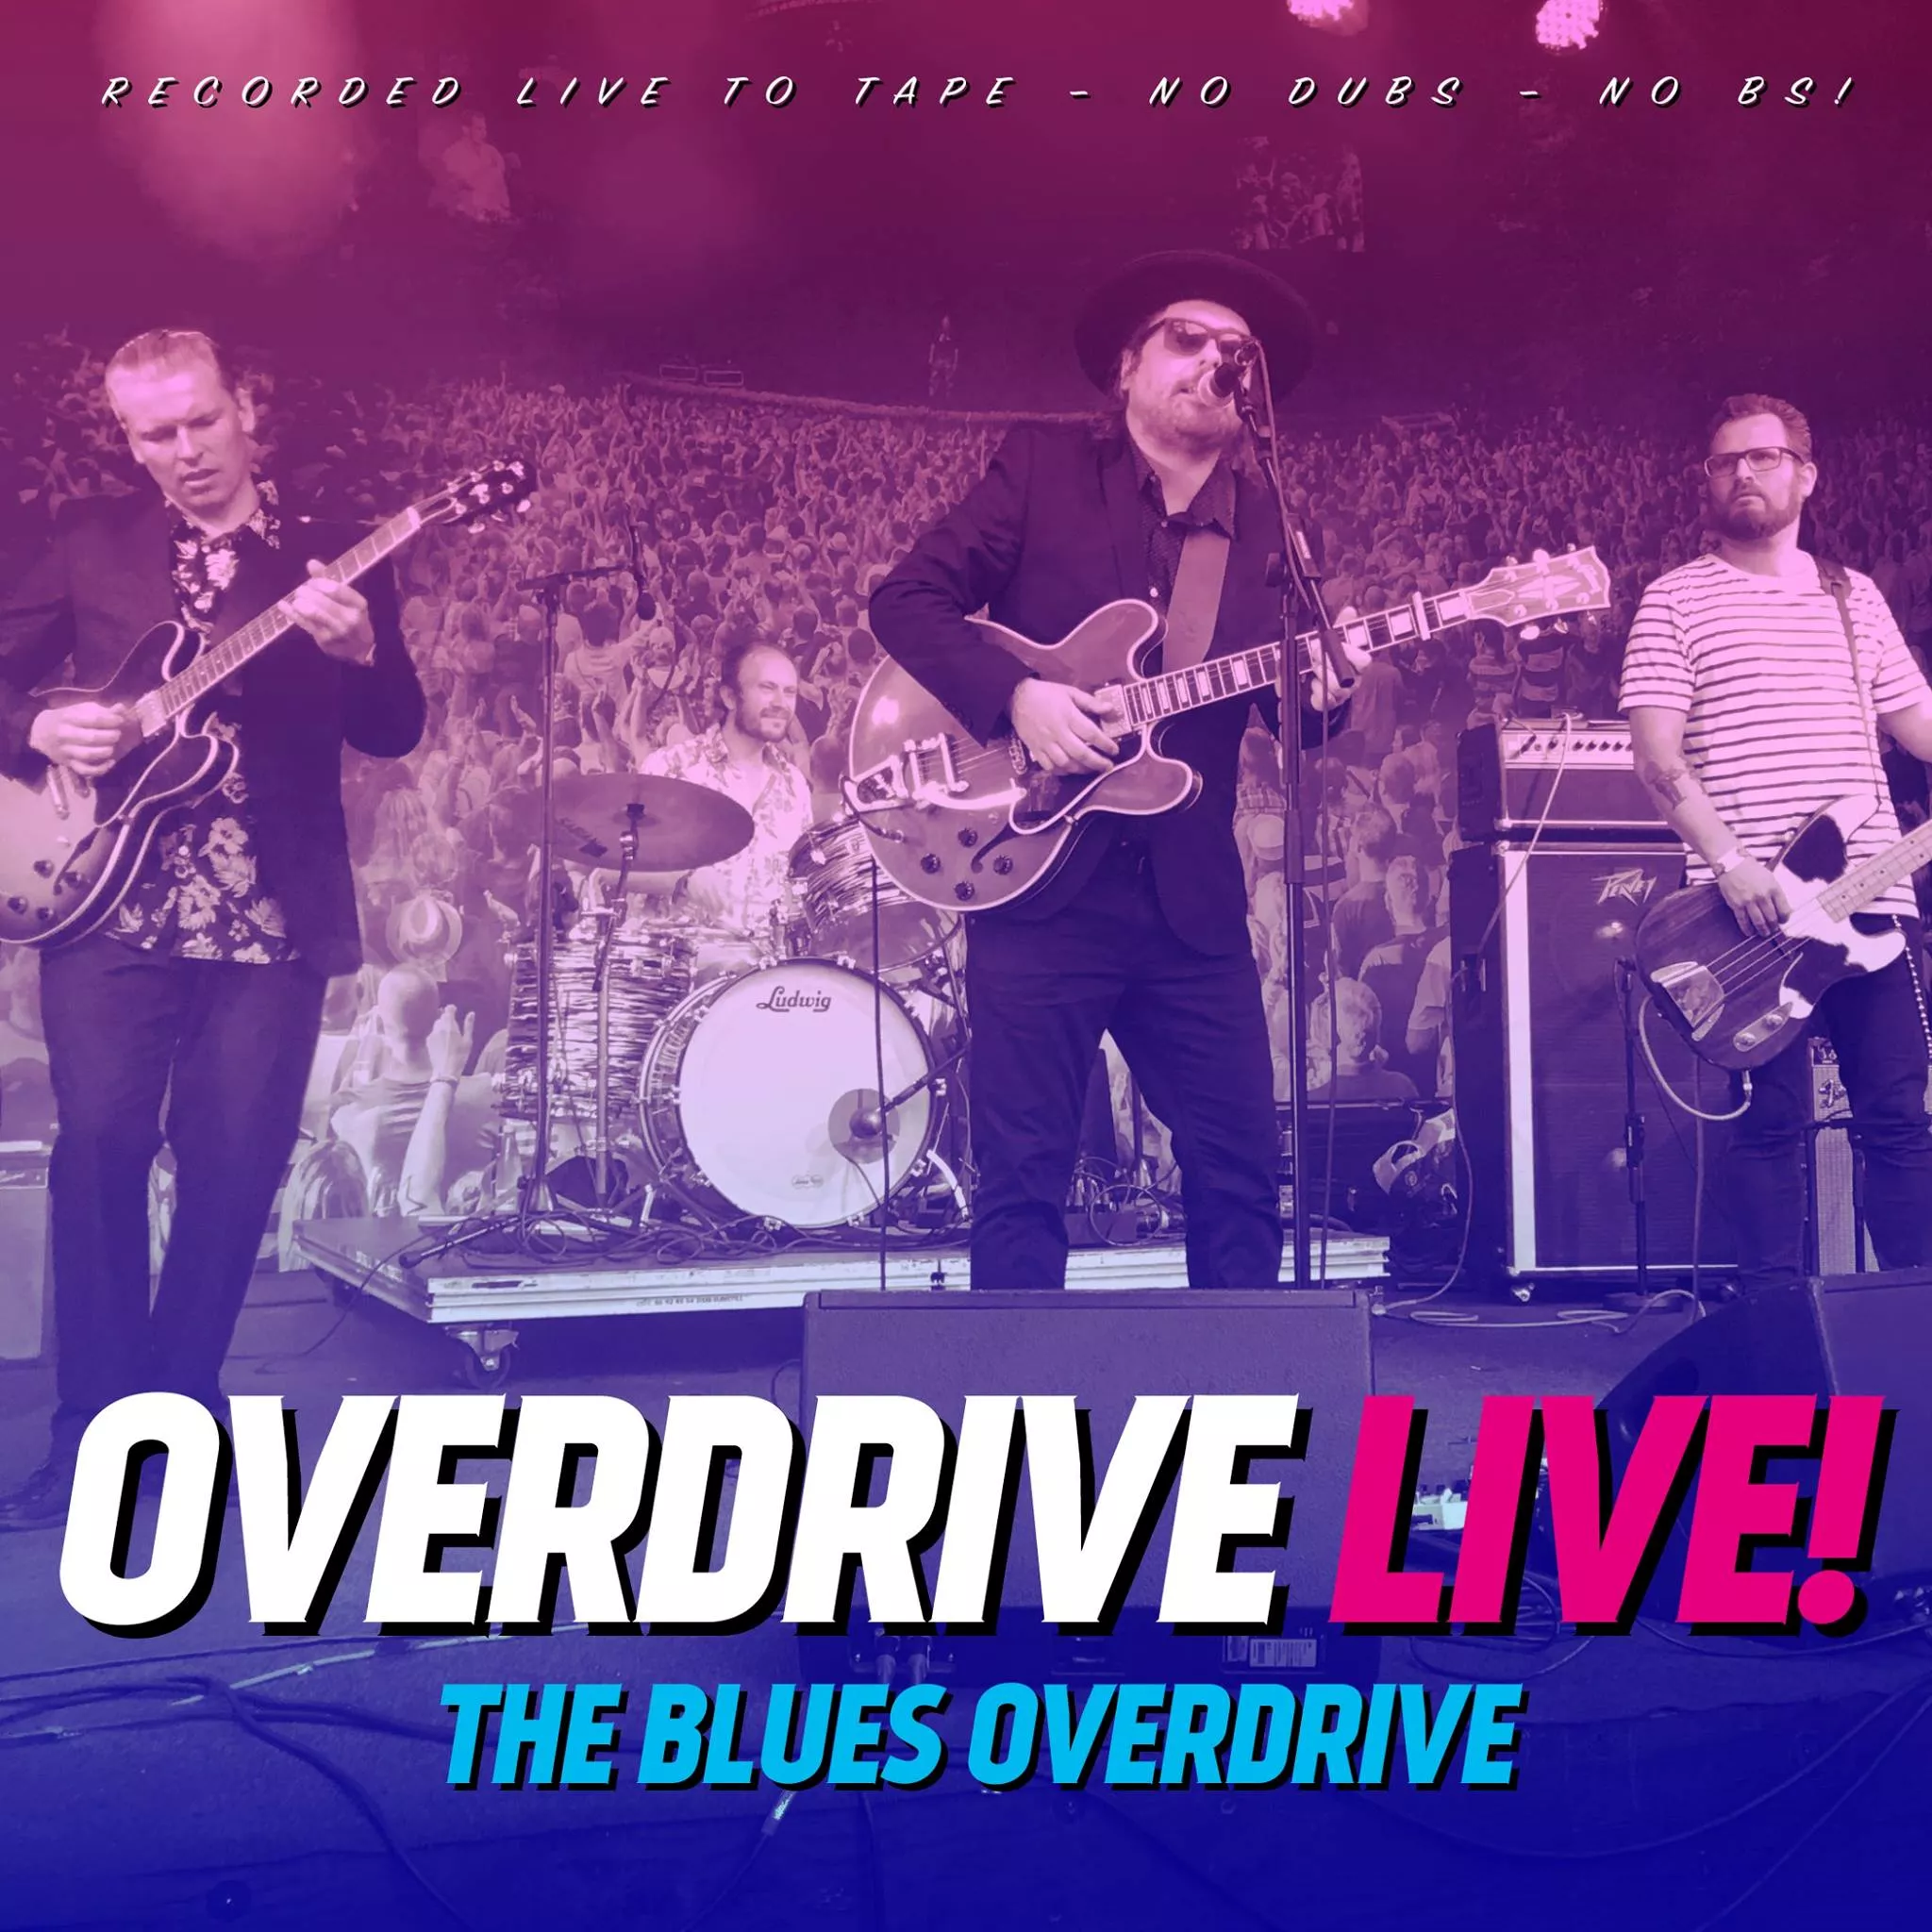 Overdrive Live! - The Blues Overdrive